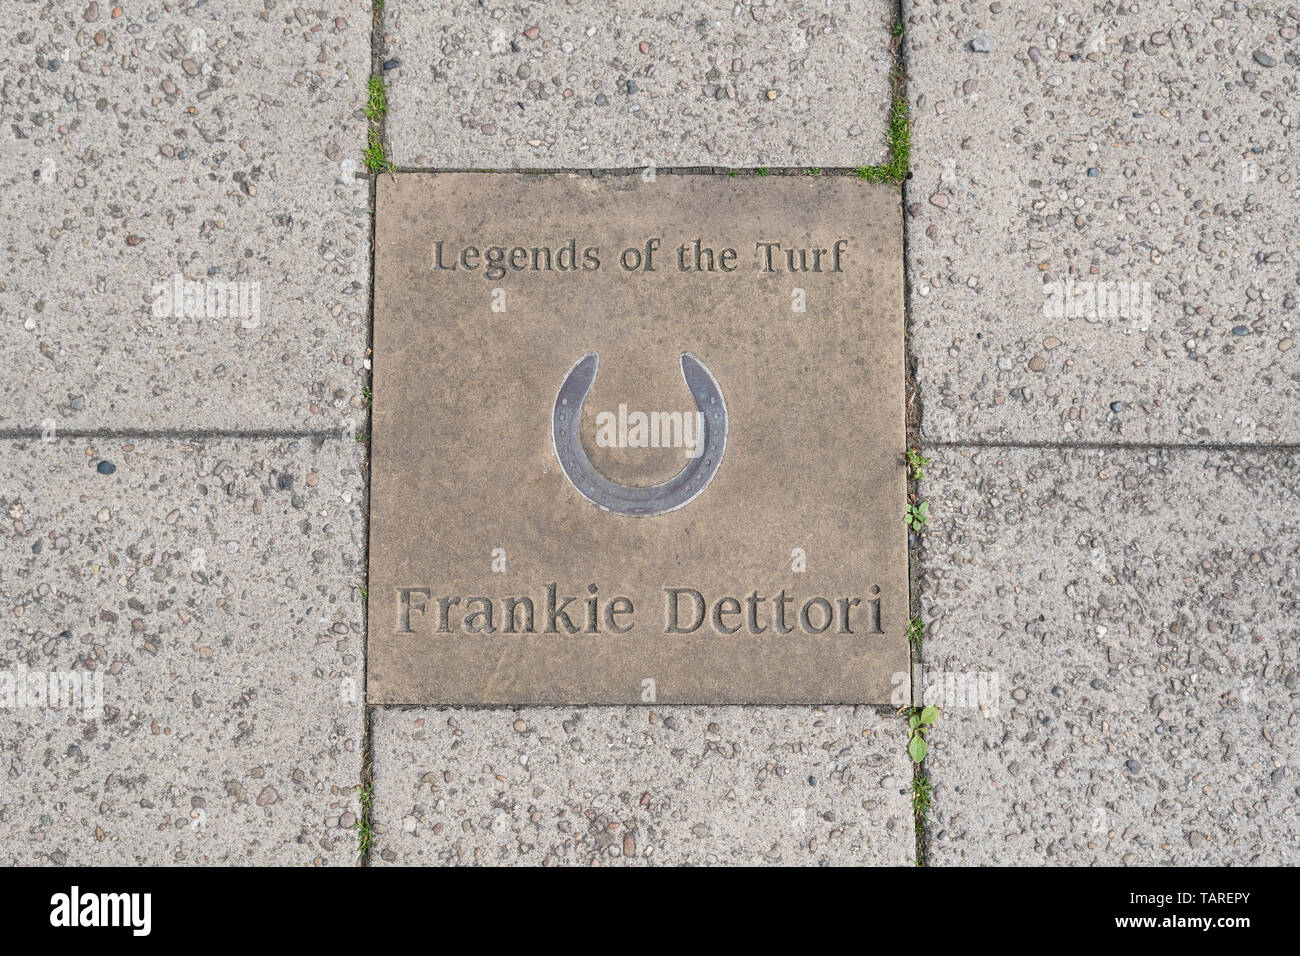 Legends of the Turf - Newmarket's 'Walk of Fame' - Frankie Dettori commemorative paving slab in Newmarket High Street, England, UK Stock Photo